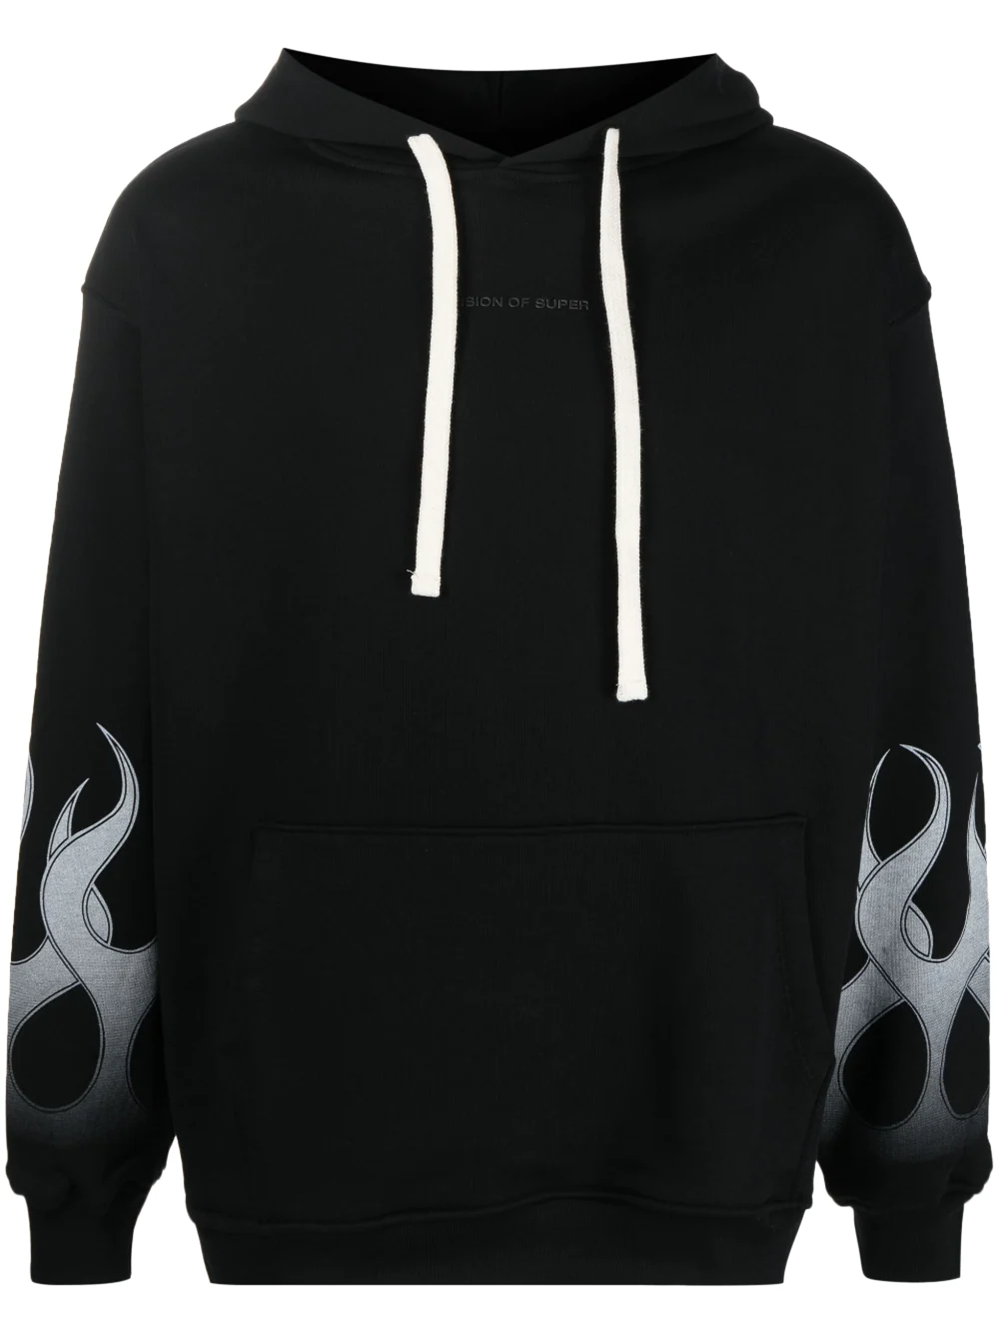 VISION OF SUPER NEGATIVE WHITE FLAMES HOODIE